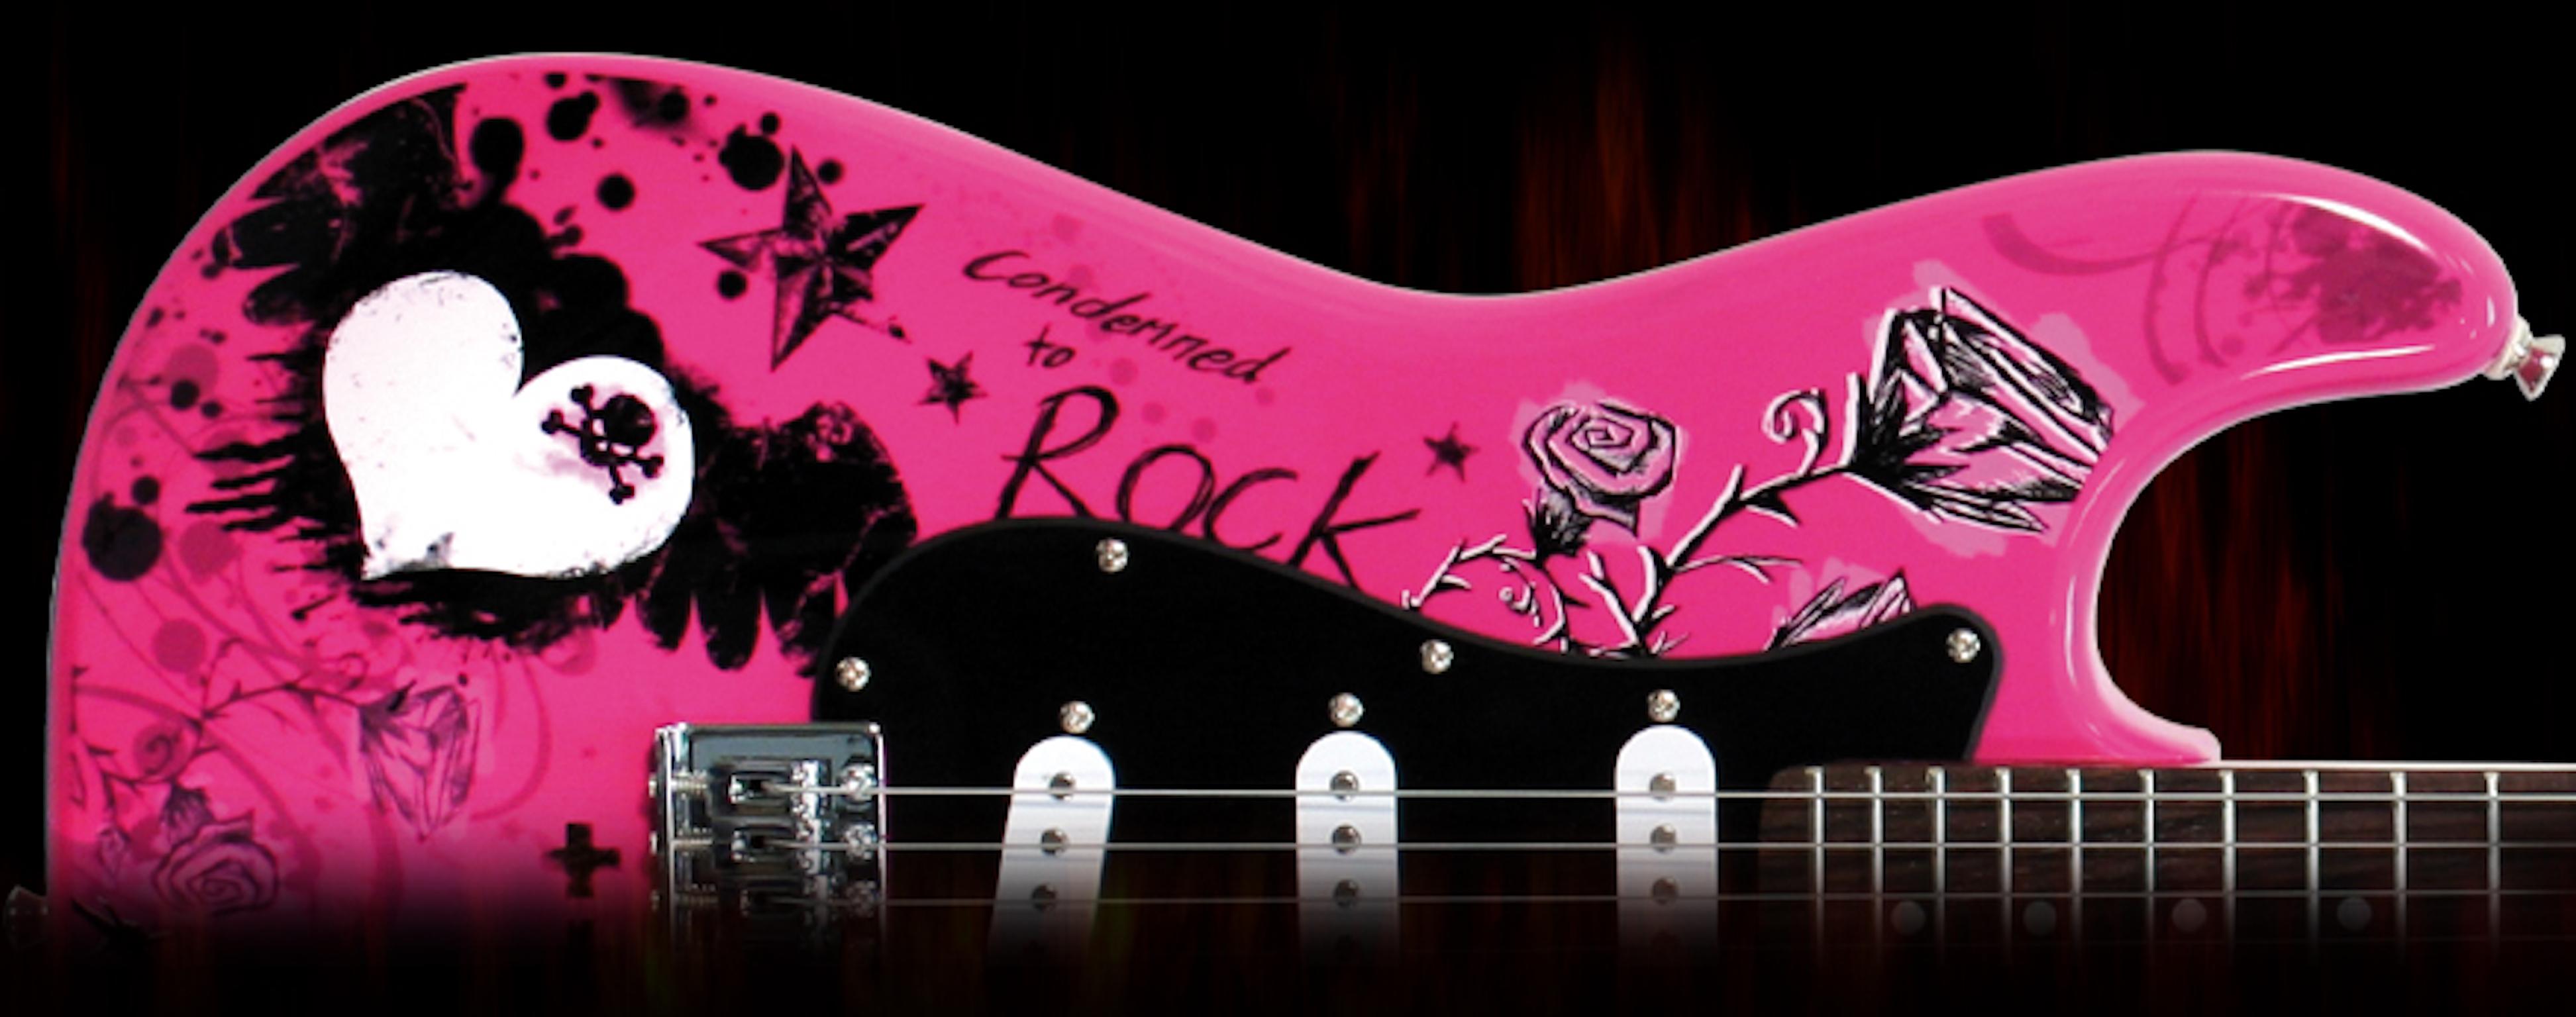 Post-Modern Lamp Guitar Electric Punk Bubble Gum Pink Condemned to Rock & Roll Chrome Maple For Sale